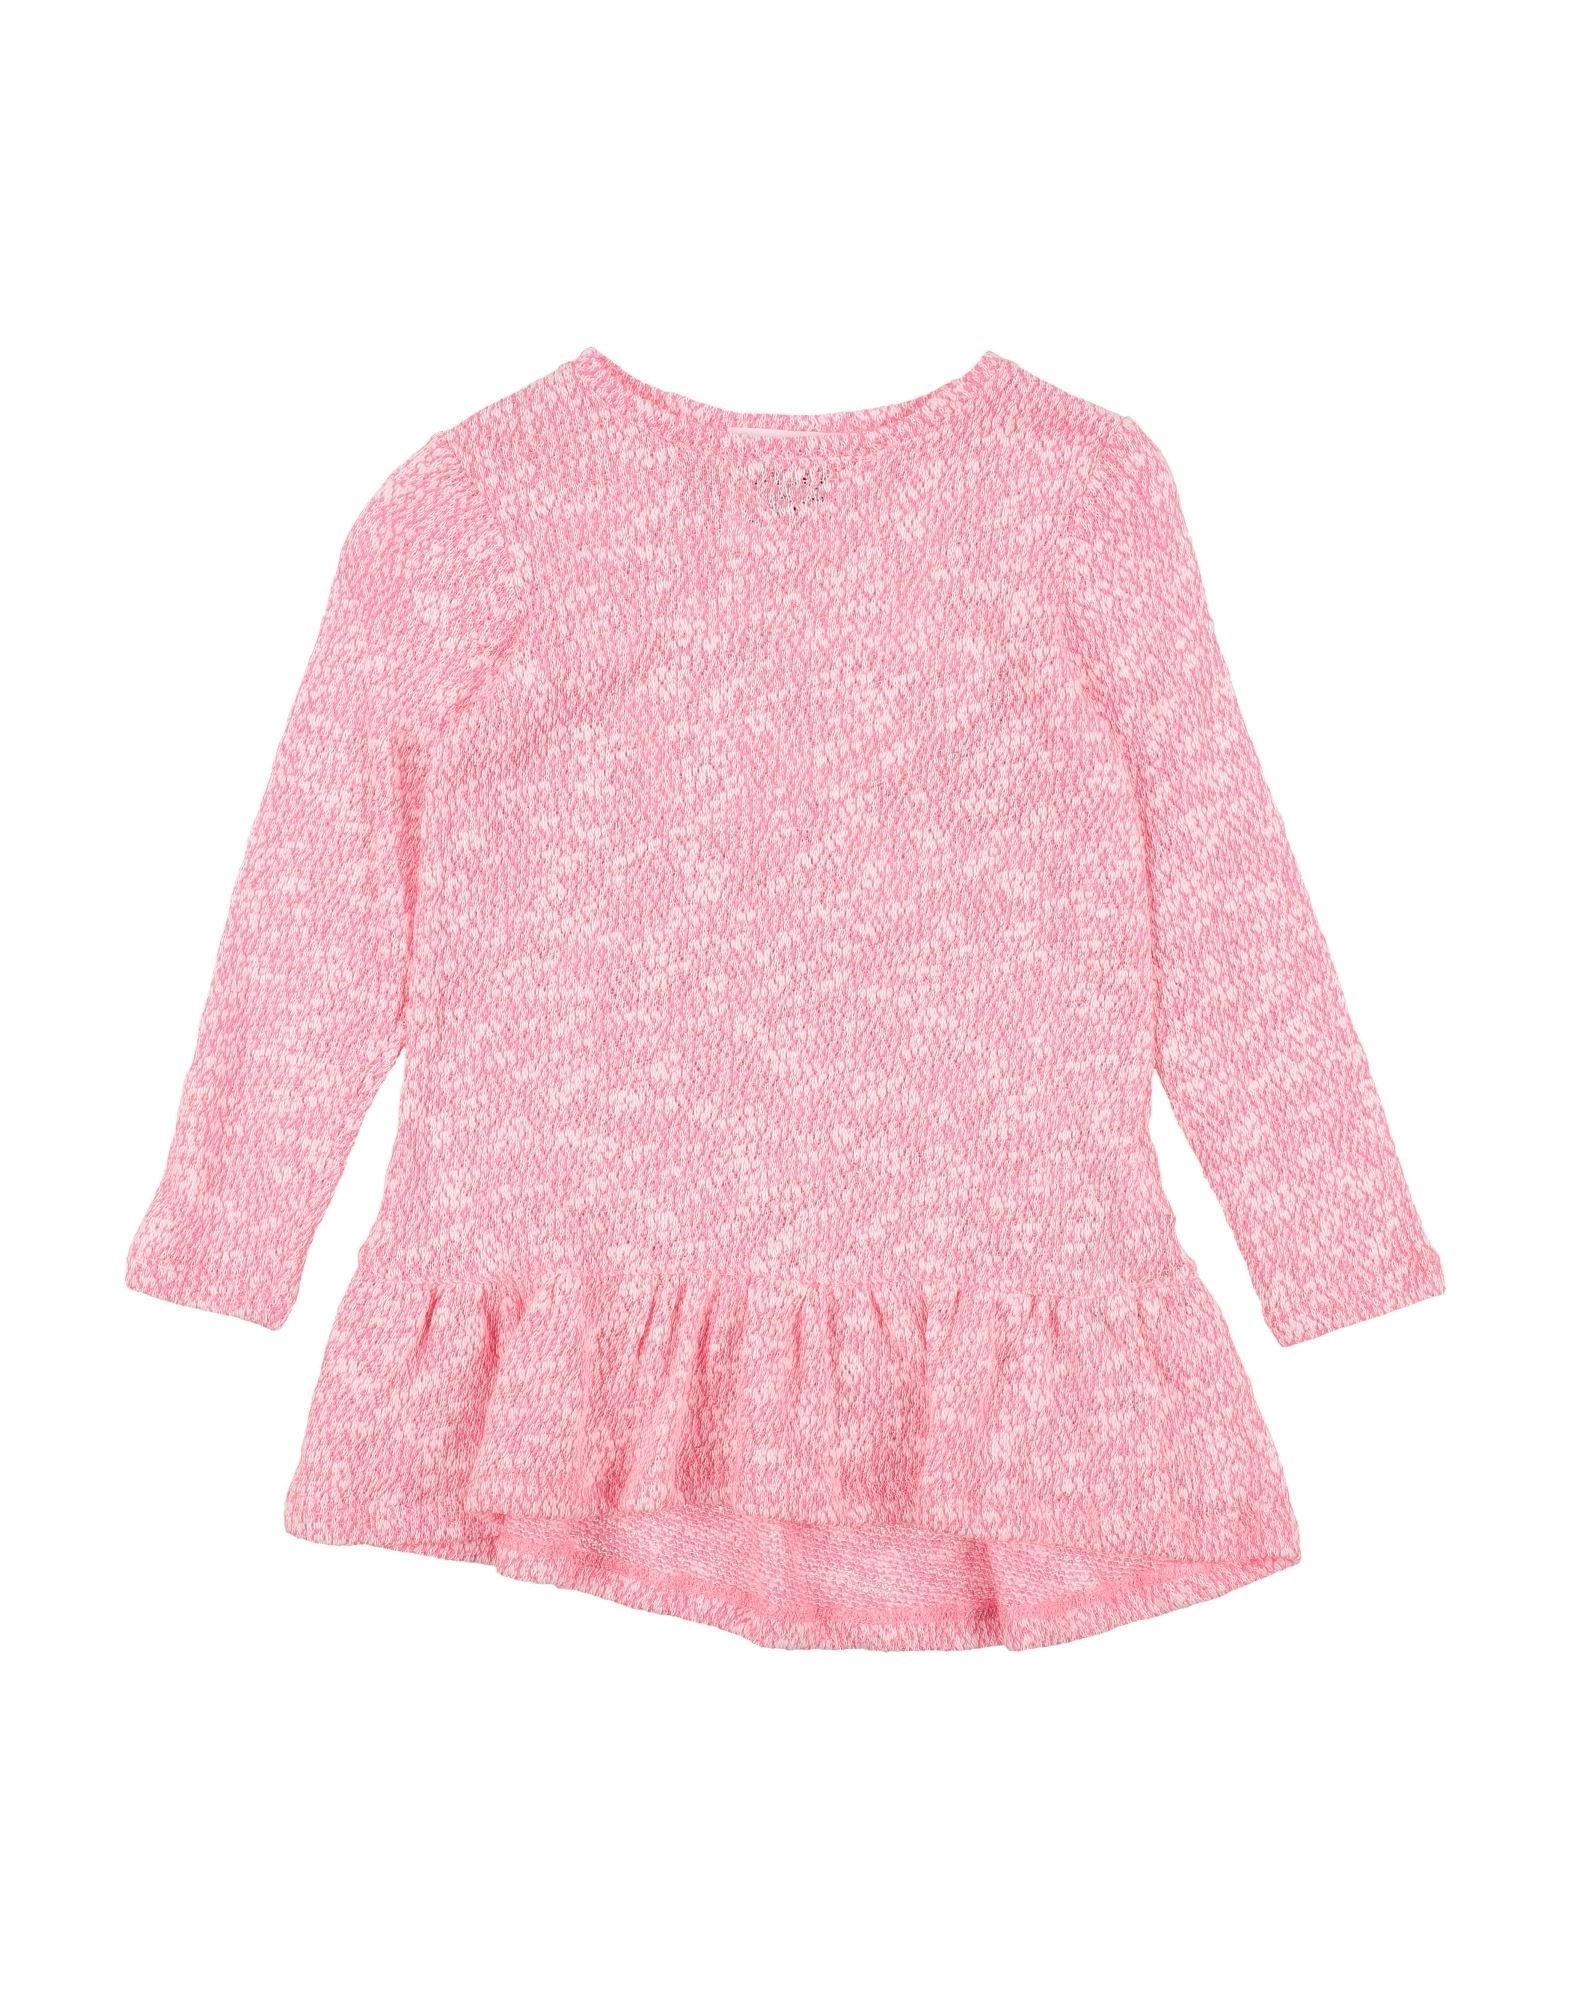 DOUUOD DOUUOD TODDLER GIRL SWEATER PINK SIZE 3 COTTON, POLYESTER